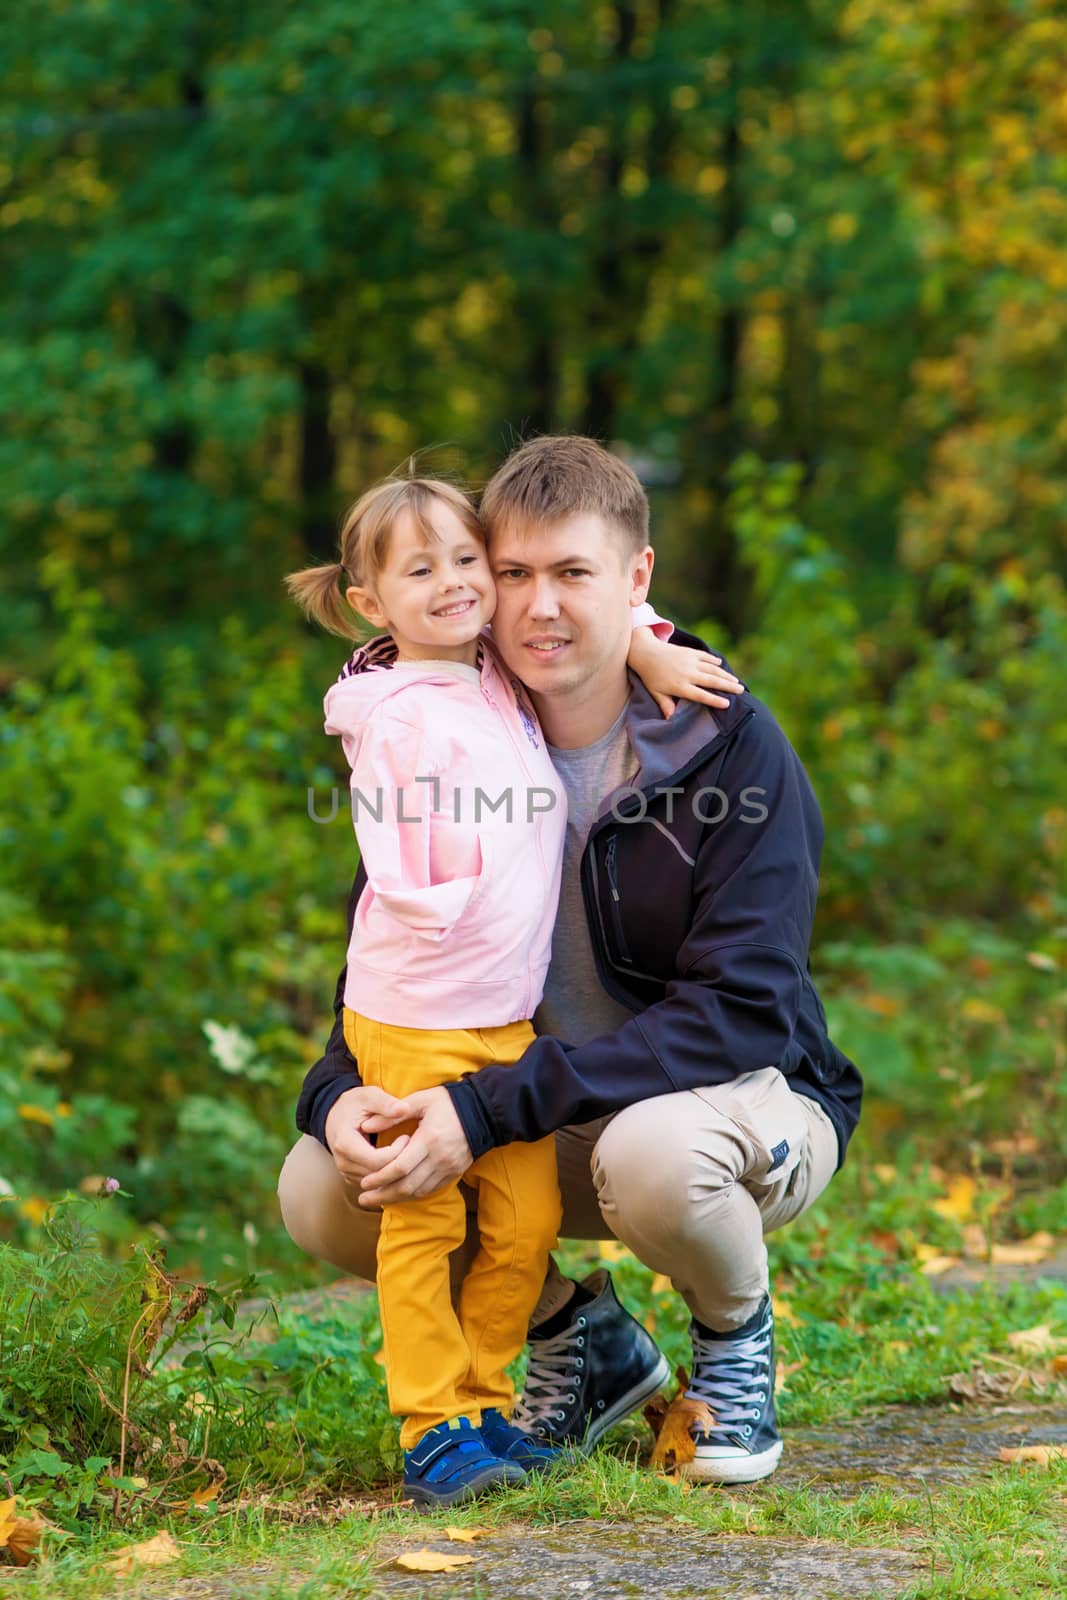 .A girl with a broken arm hugs her dad in an old park on an autumn walk.